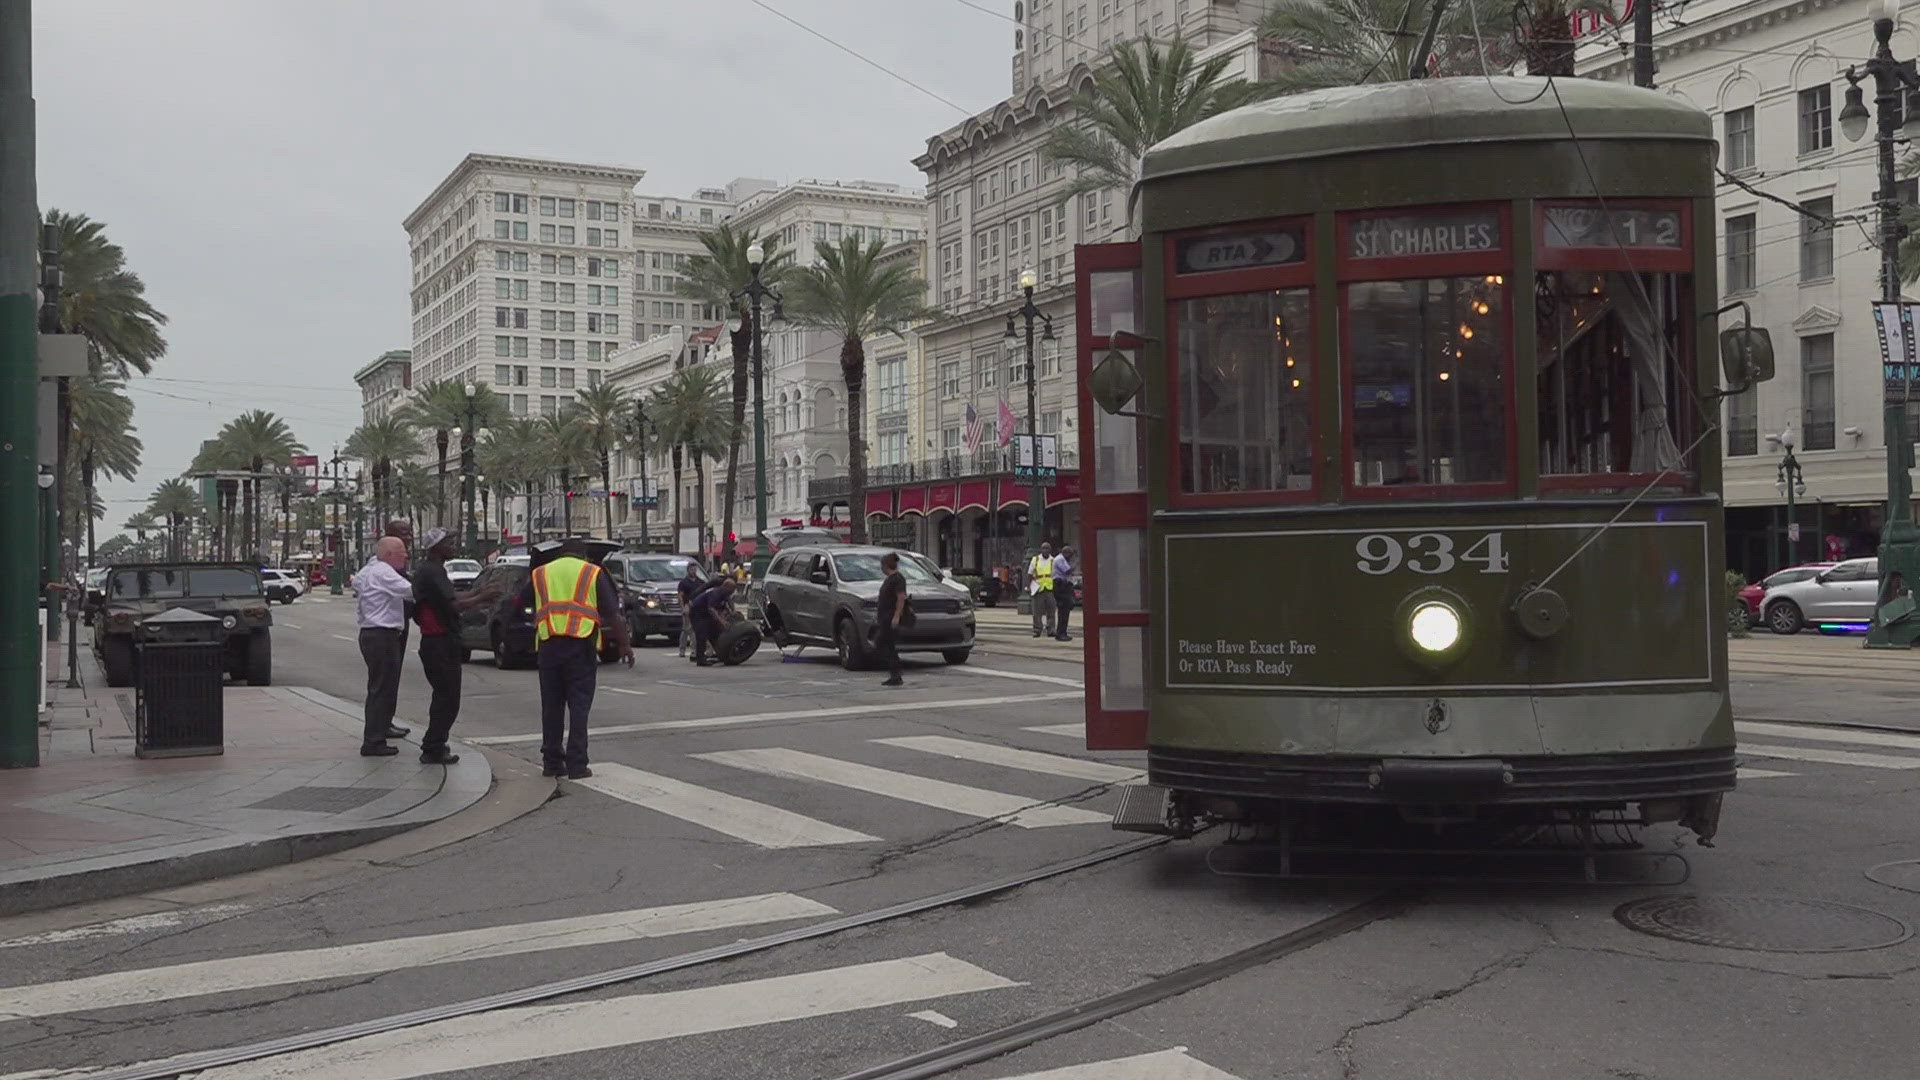 The SUV was reportedly parked on the neutral ground when the streetcar hit it.